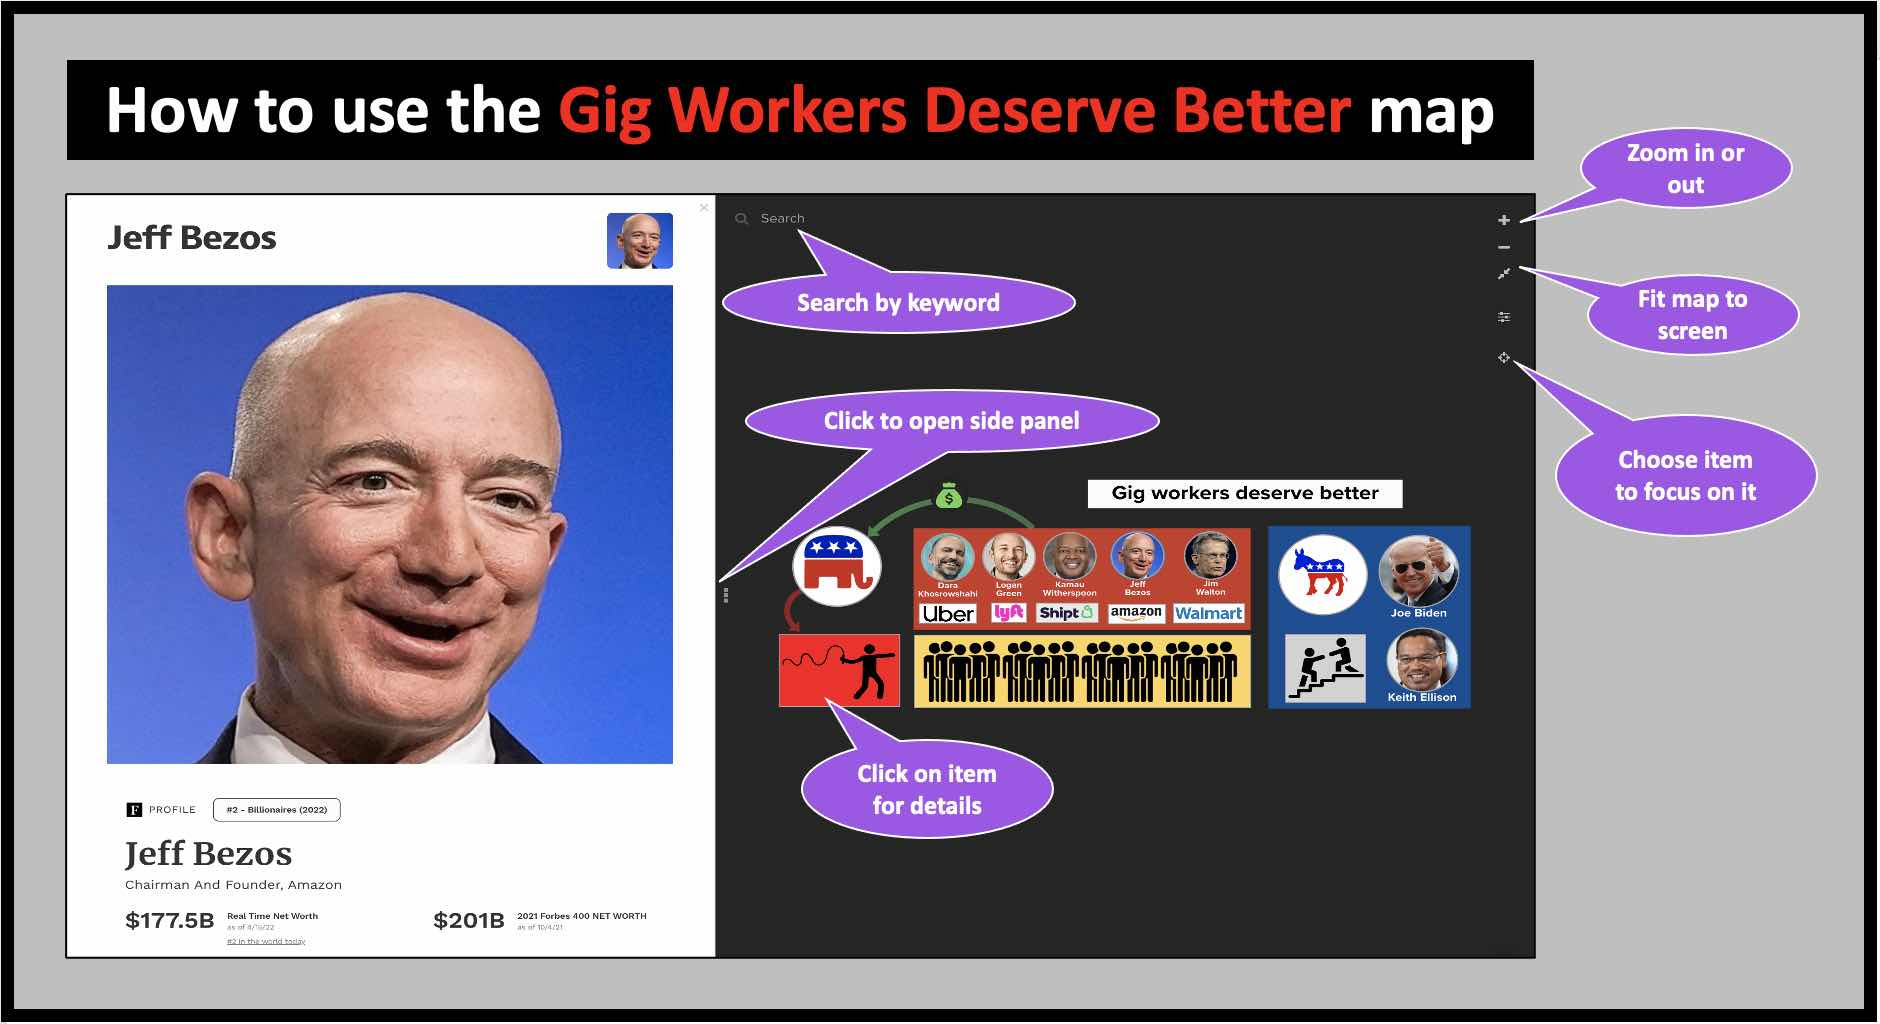 How to use the GIG WORKERS DERVE BETTER map to follow the money. See how gig workers are exploited with the help of Republicans.